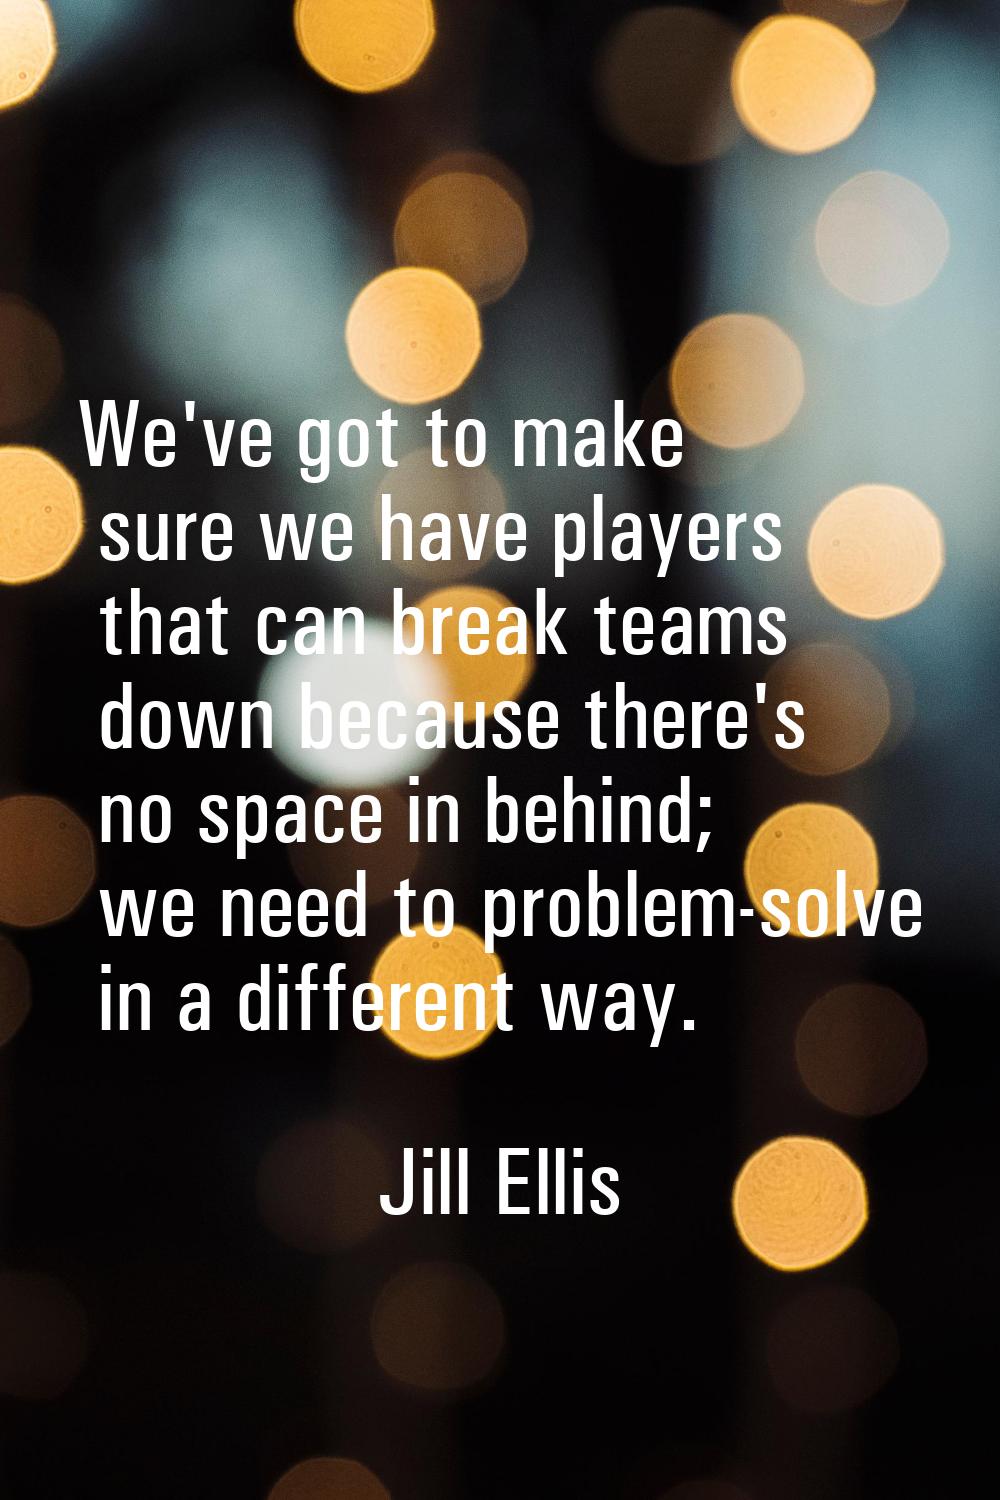 We've got to make sure we have players that can break teams down because there's no space in behind